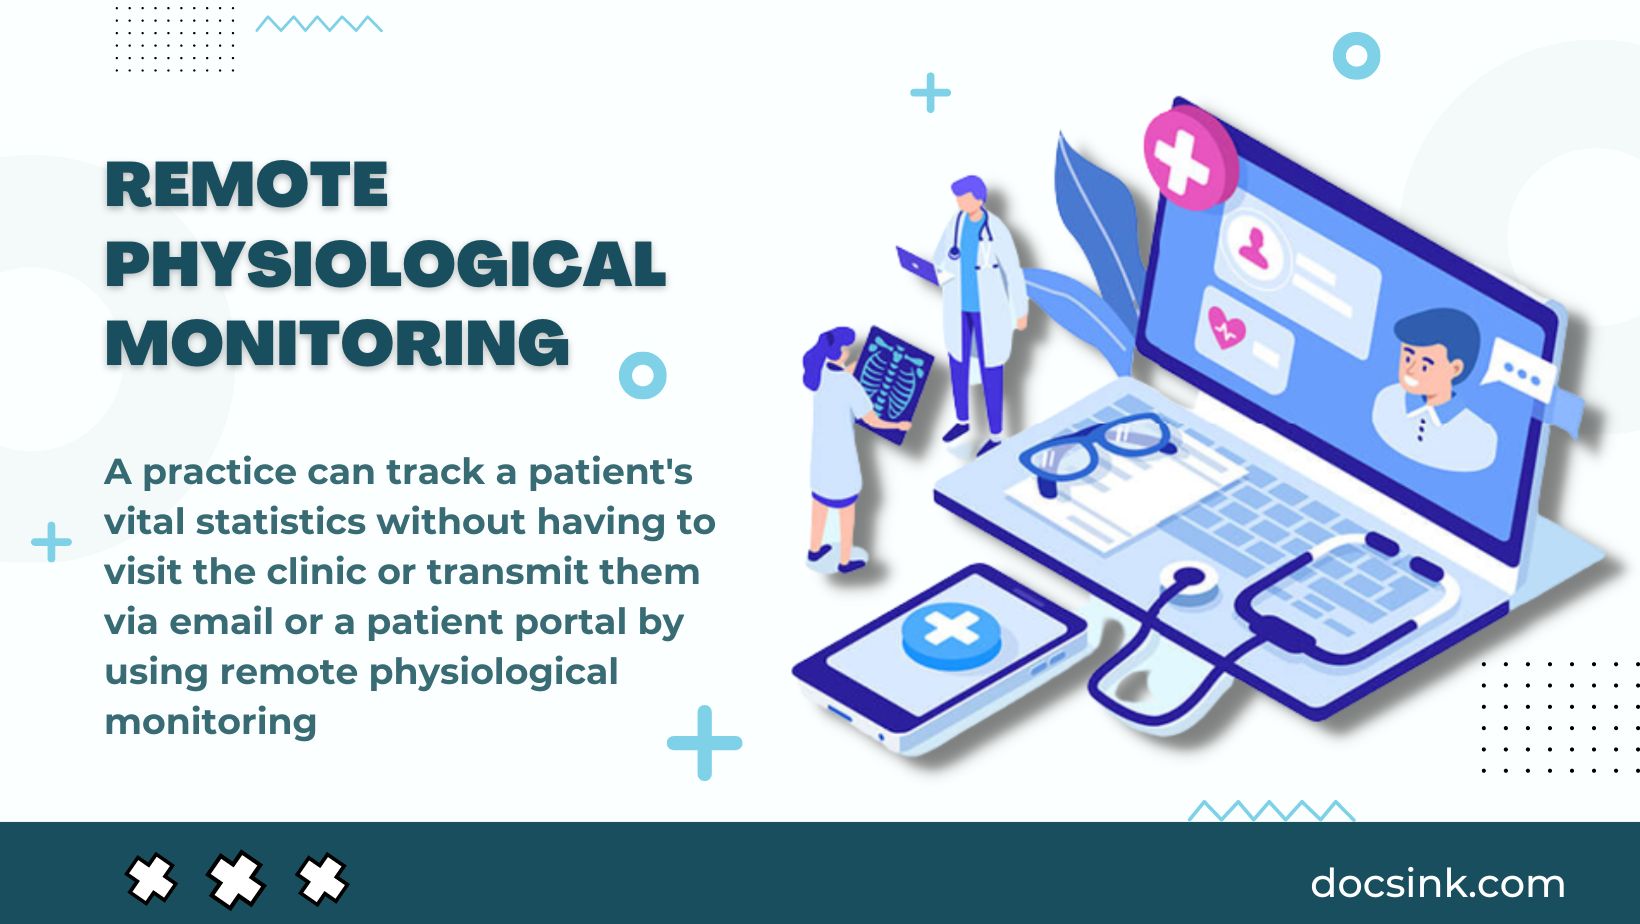 Remote Physiologic Monitoring: Working